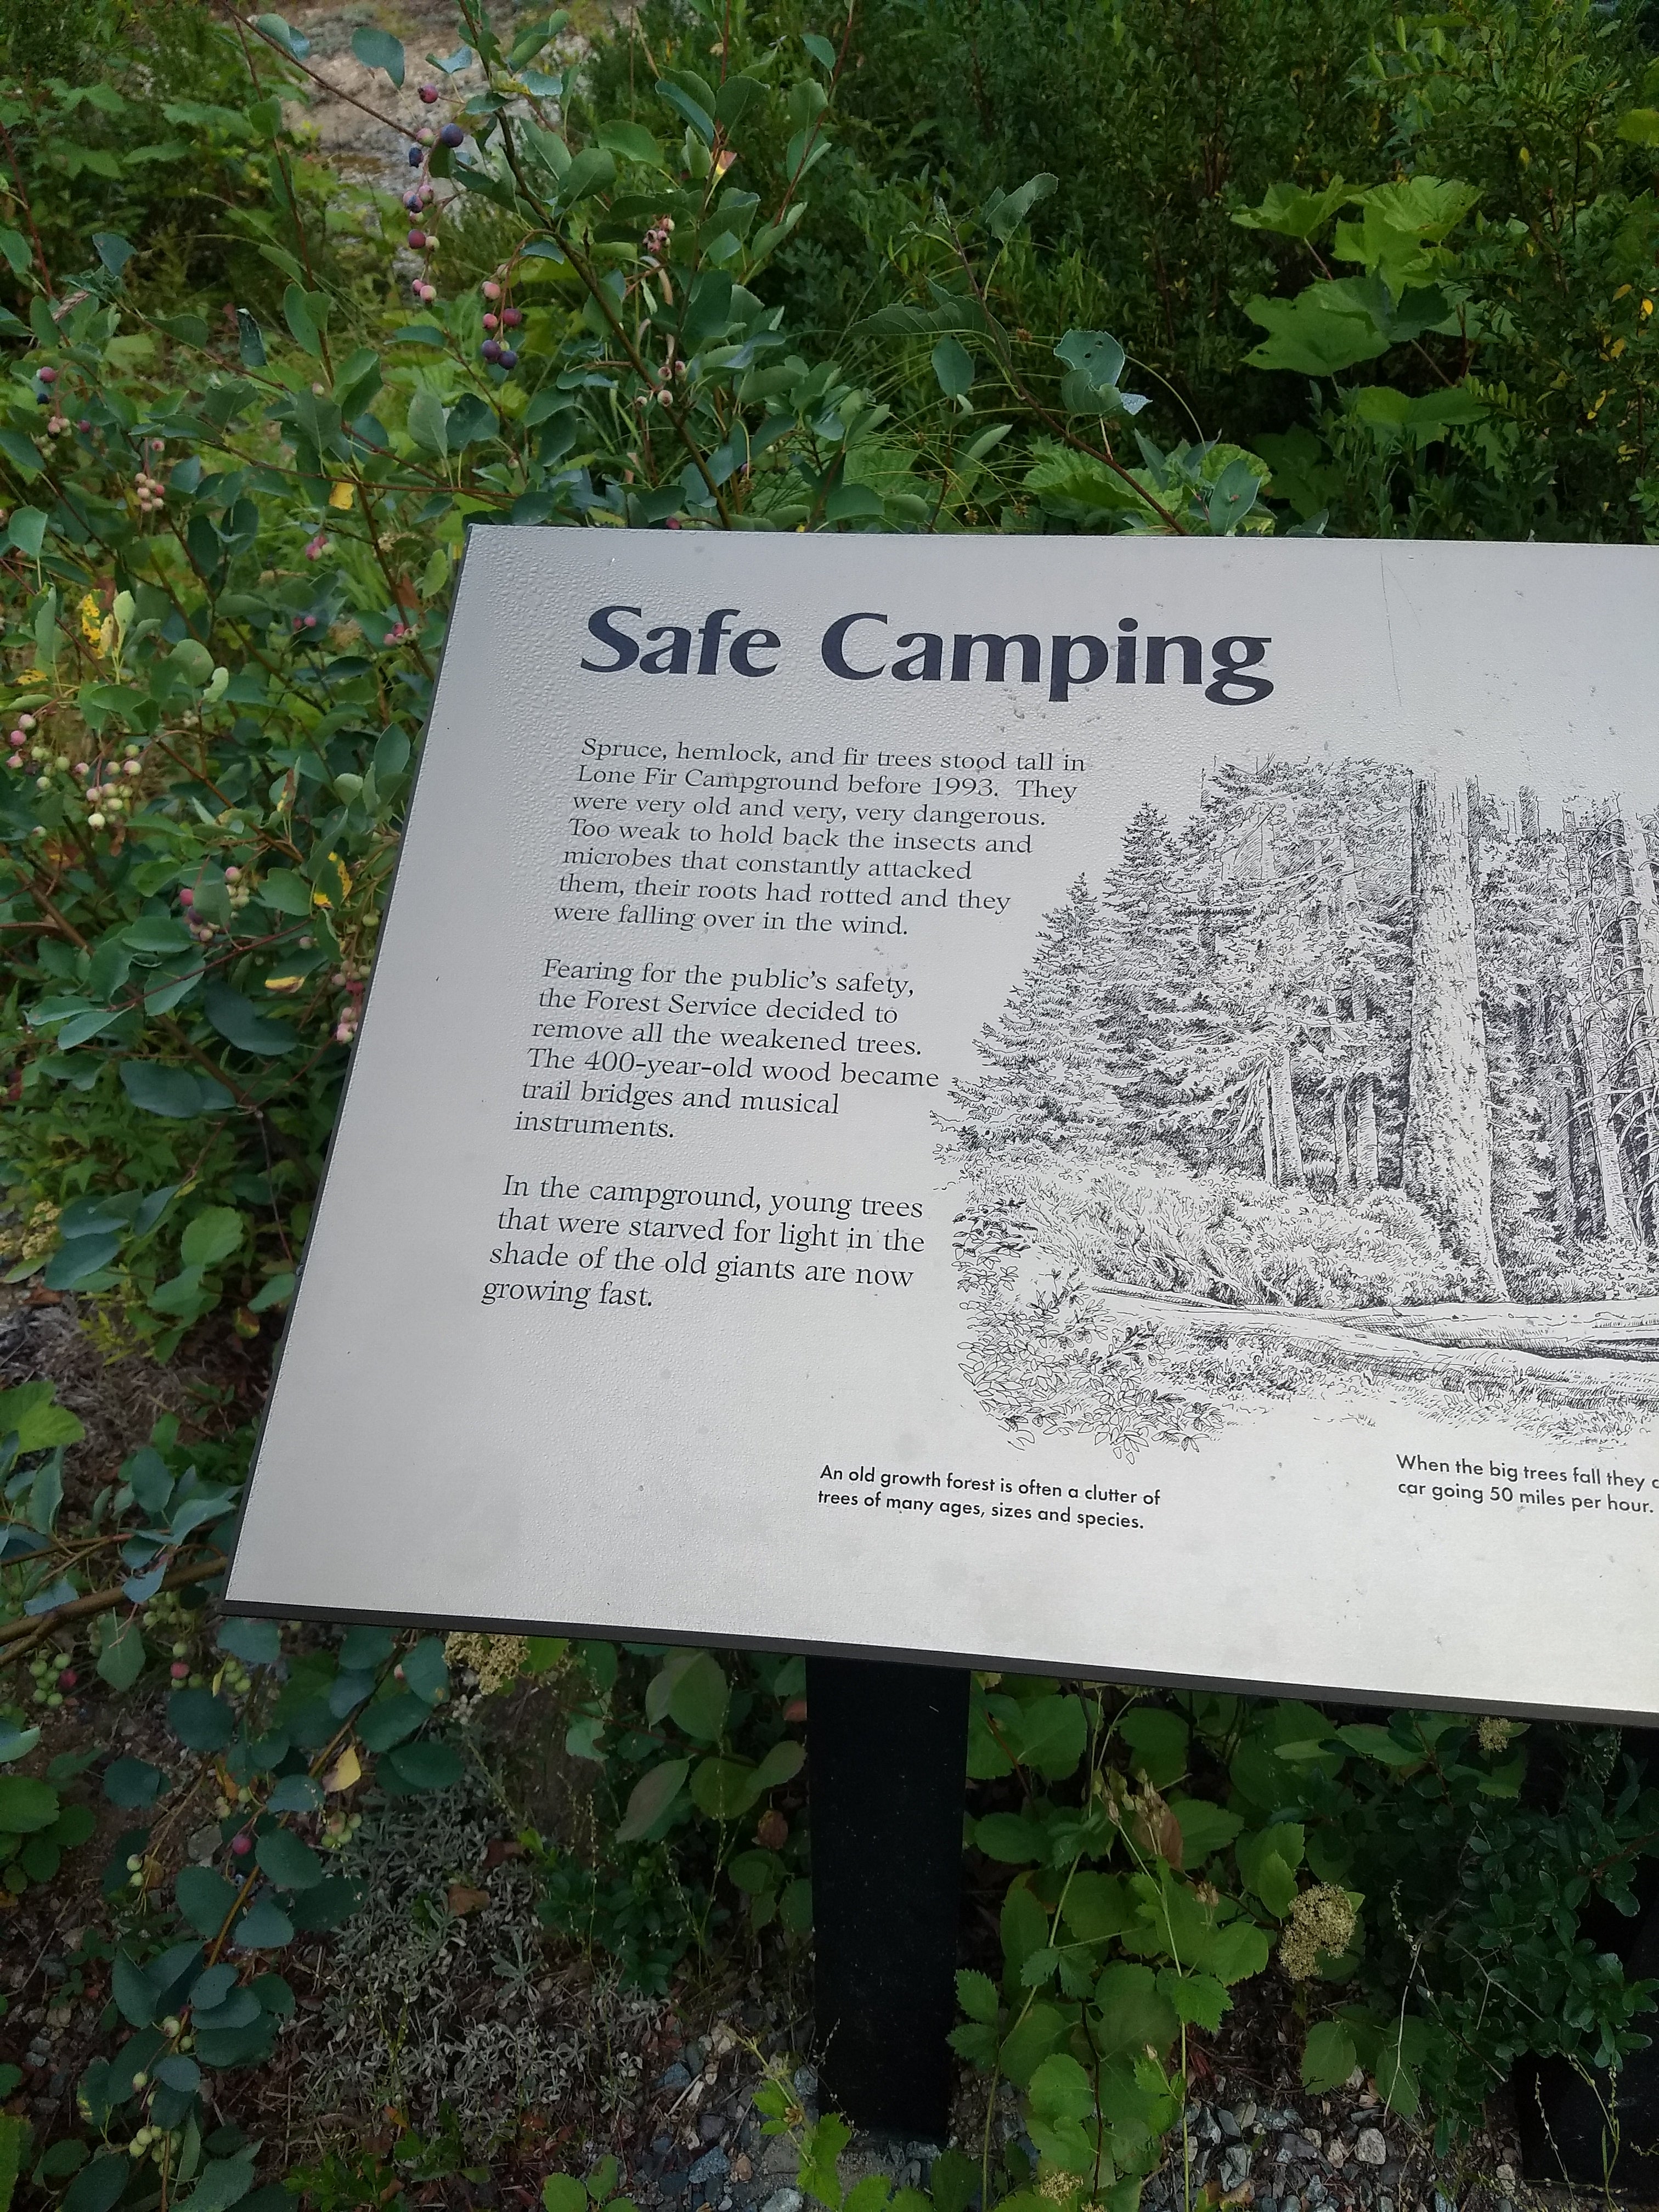 The campground had some of these informative signs.